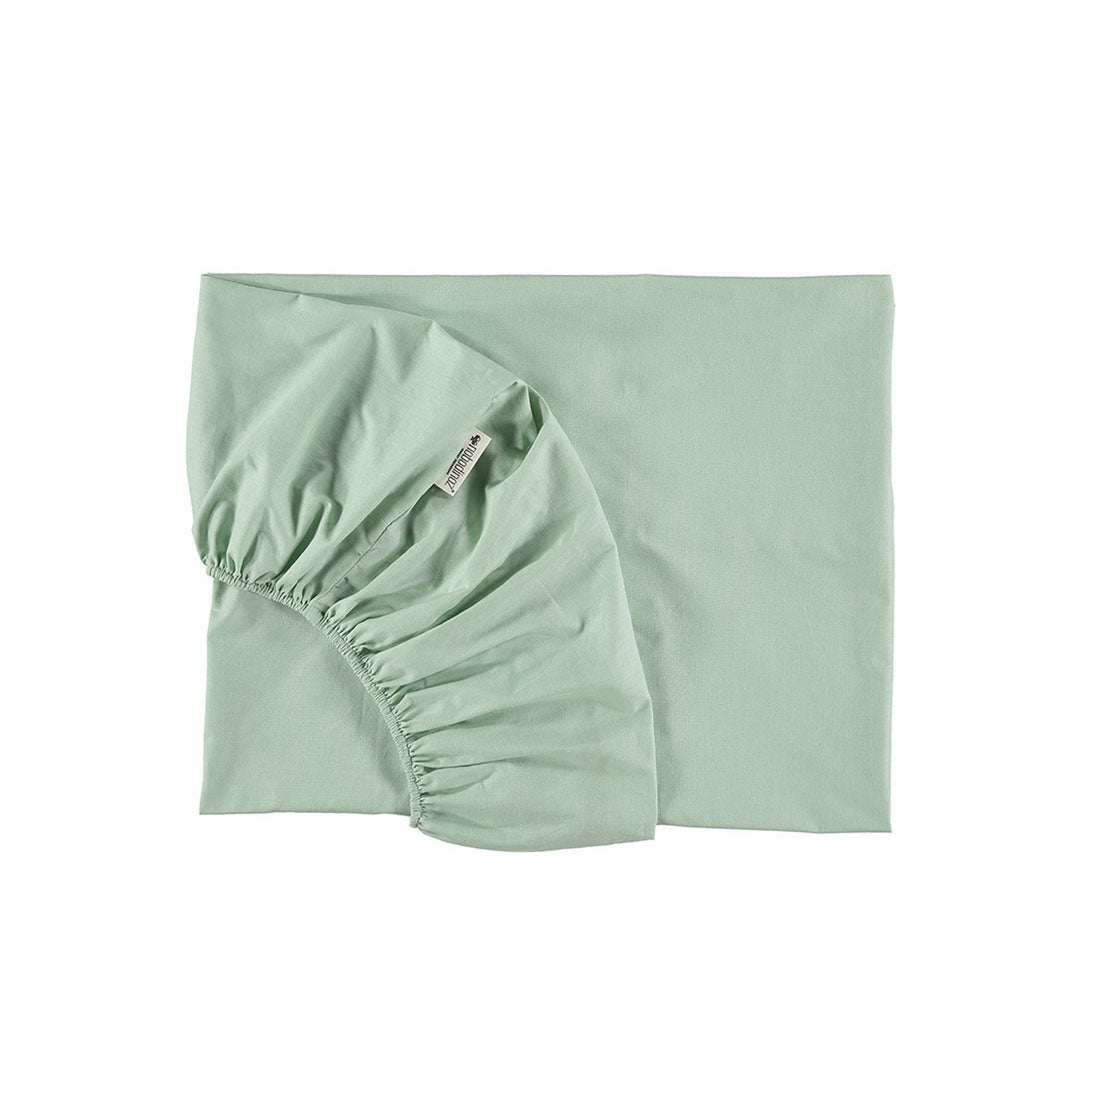 nobodinoz-fitted-sheet-single-provence-green- (1)